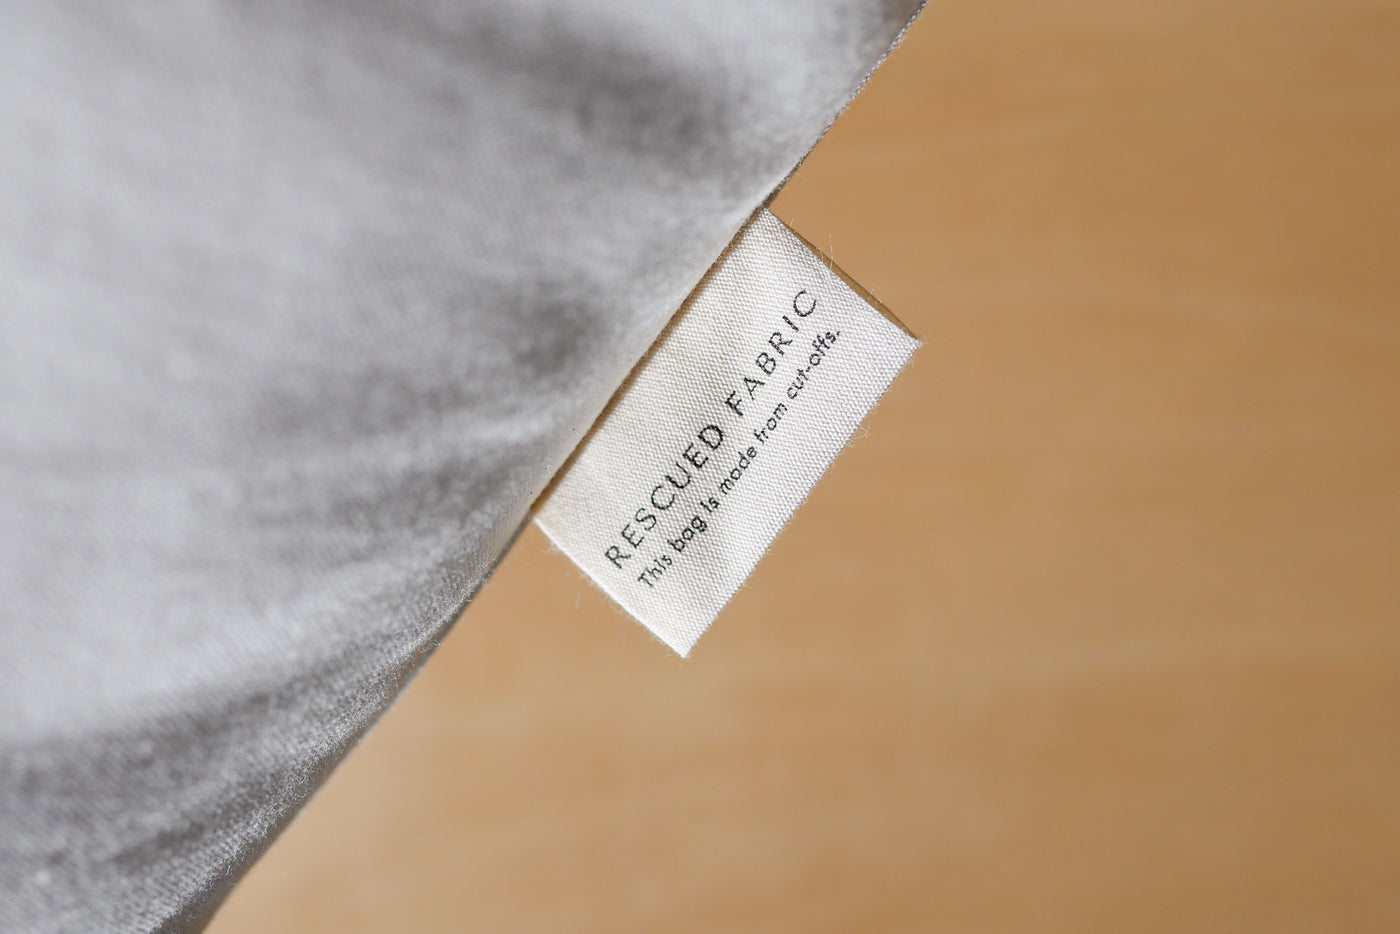 Tag on cotton canvas bag that says Rescued Fabric: this bag is made from cut-offs